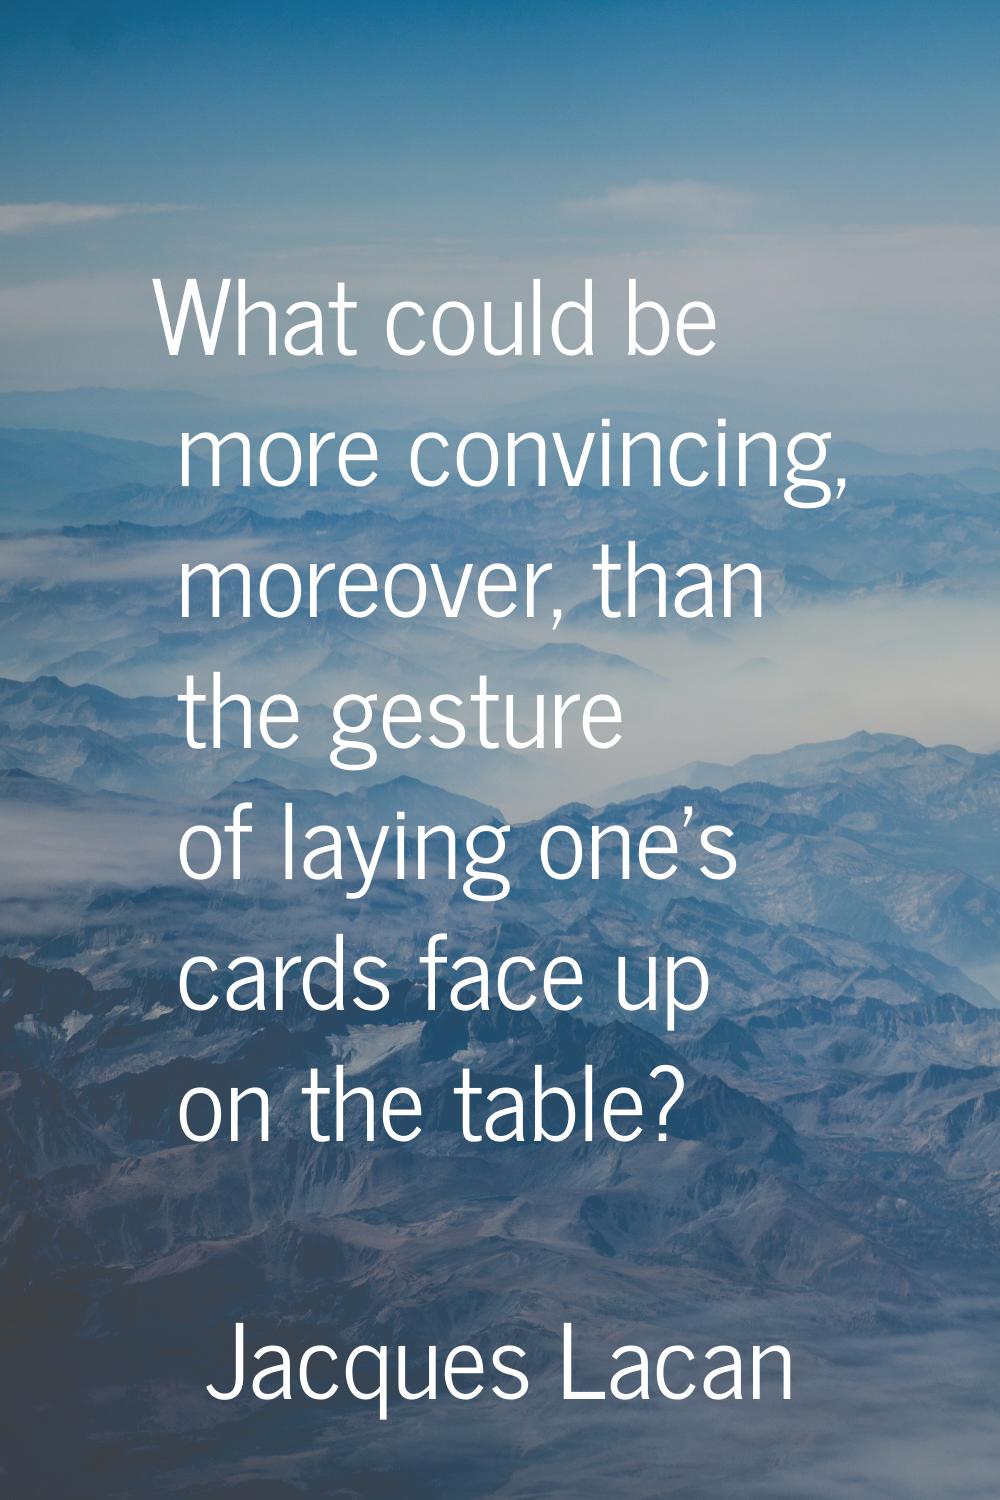 What could be more convincing, moreover, than the gesture of laying one's cards face up on the tabl